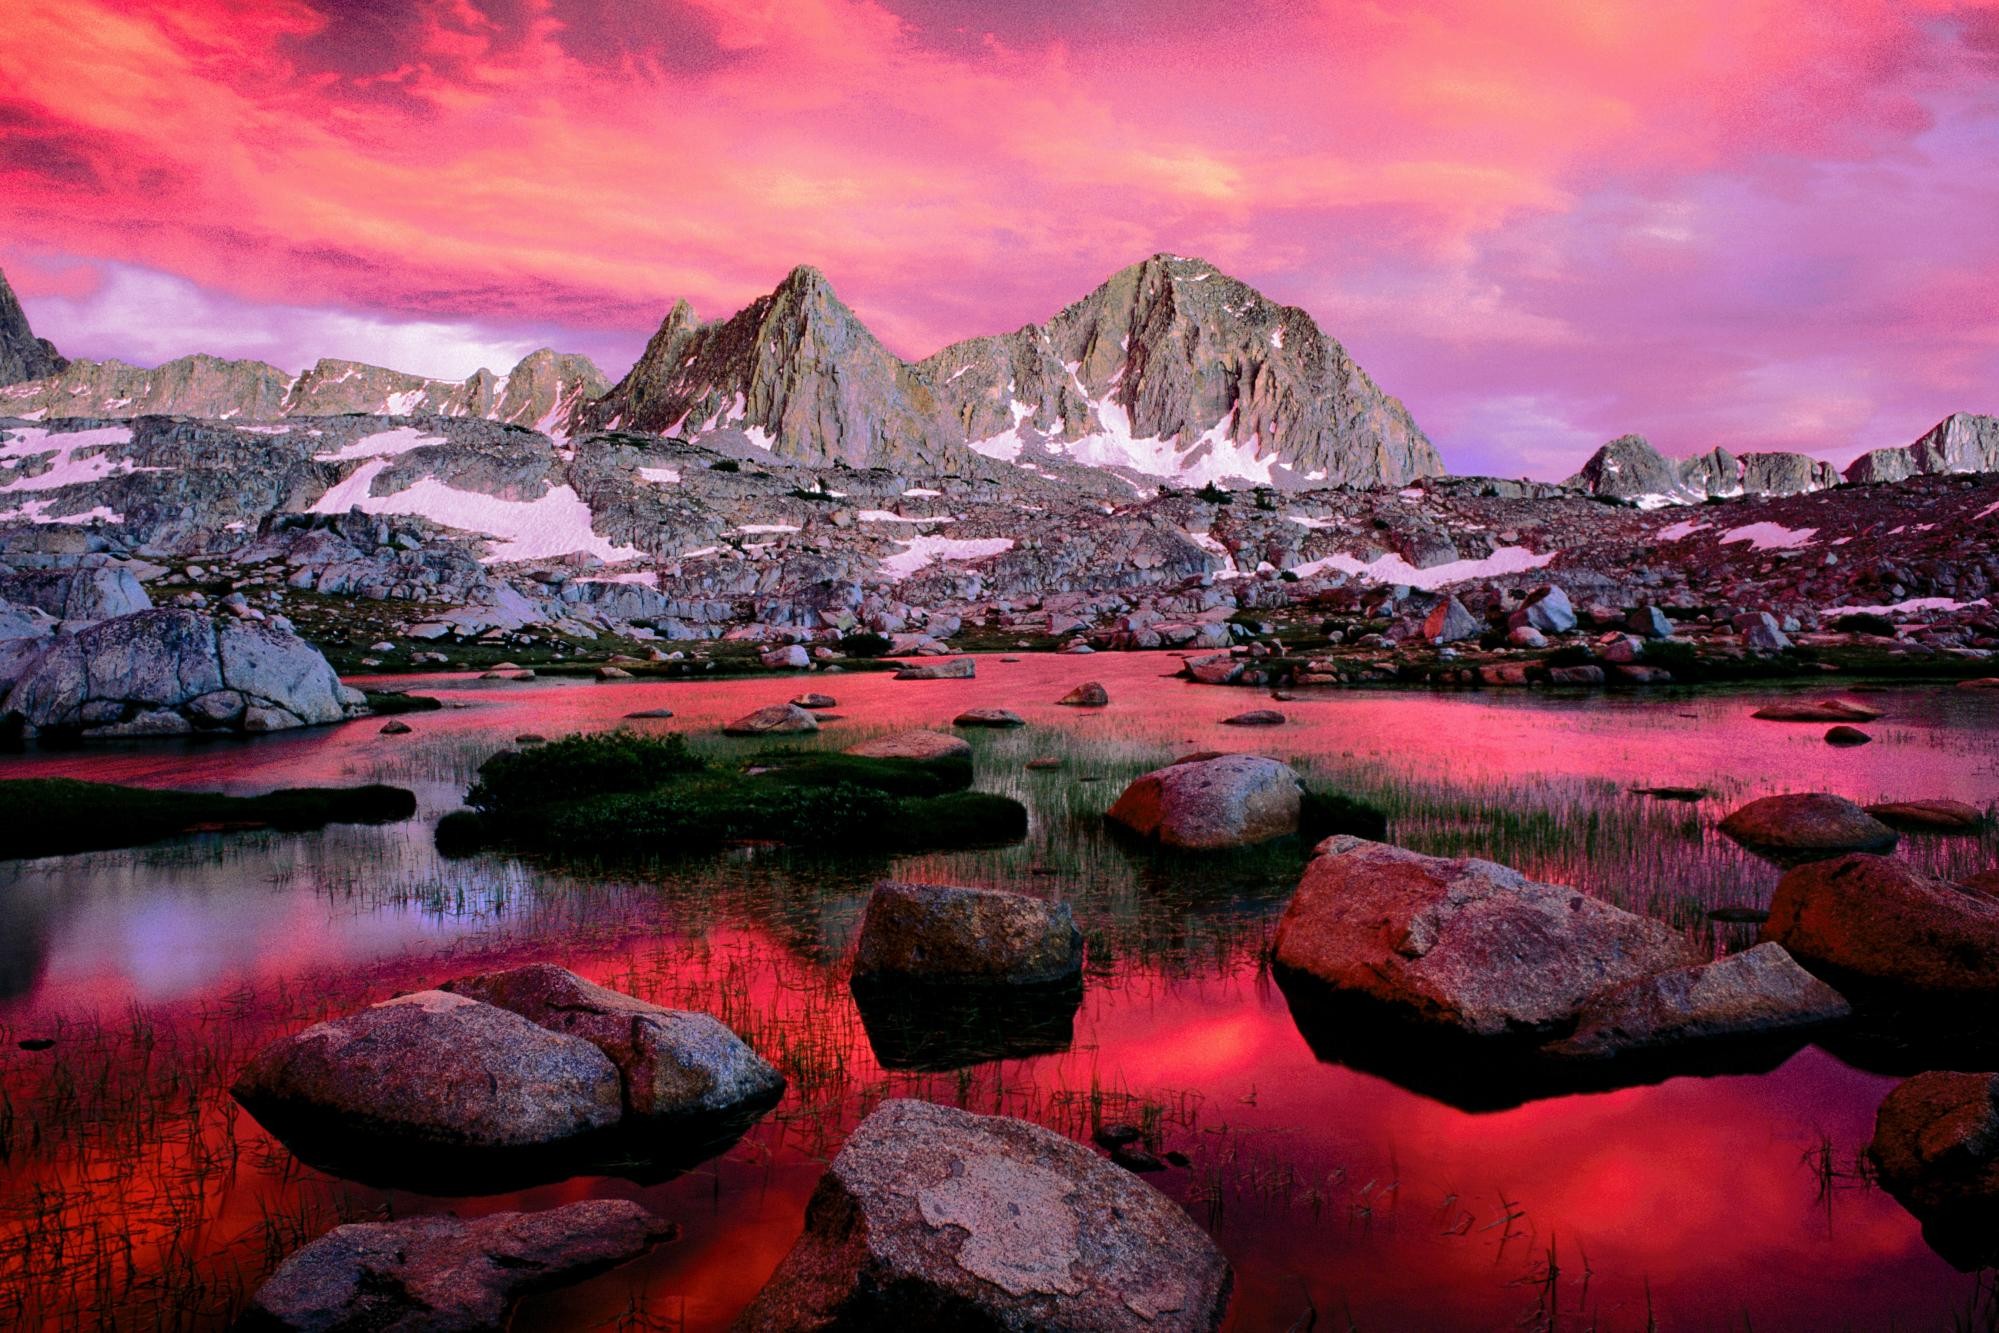 Mountain wallpaper ·① Download free stunning wallpapers for desktop and ...